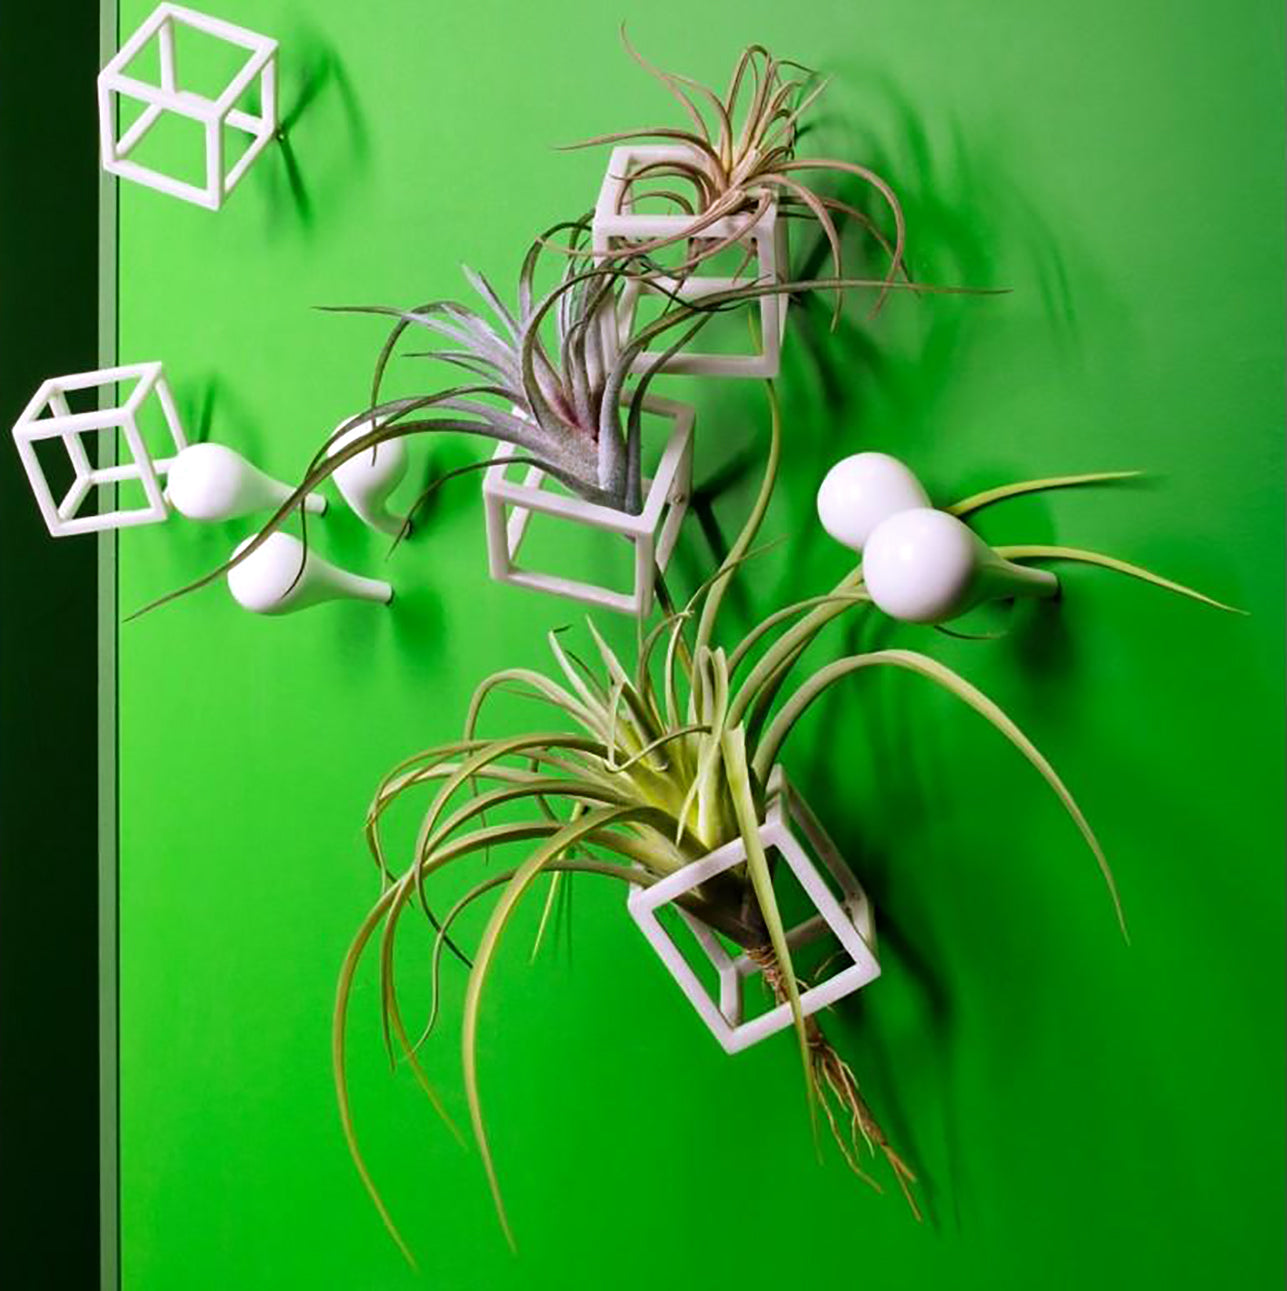 Wall Play™: Cubical, Off-White